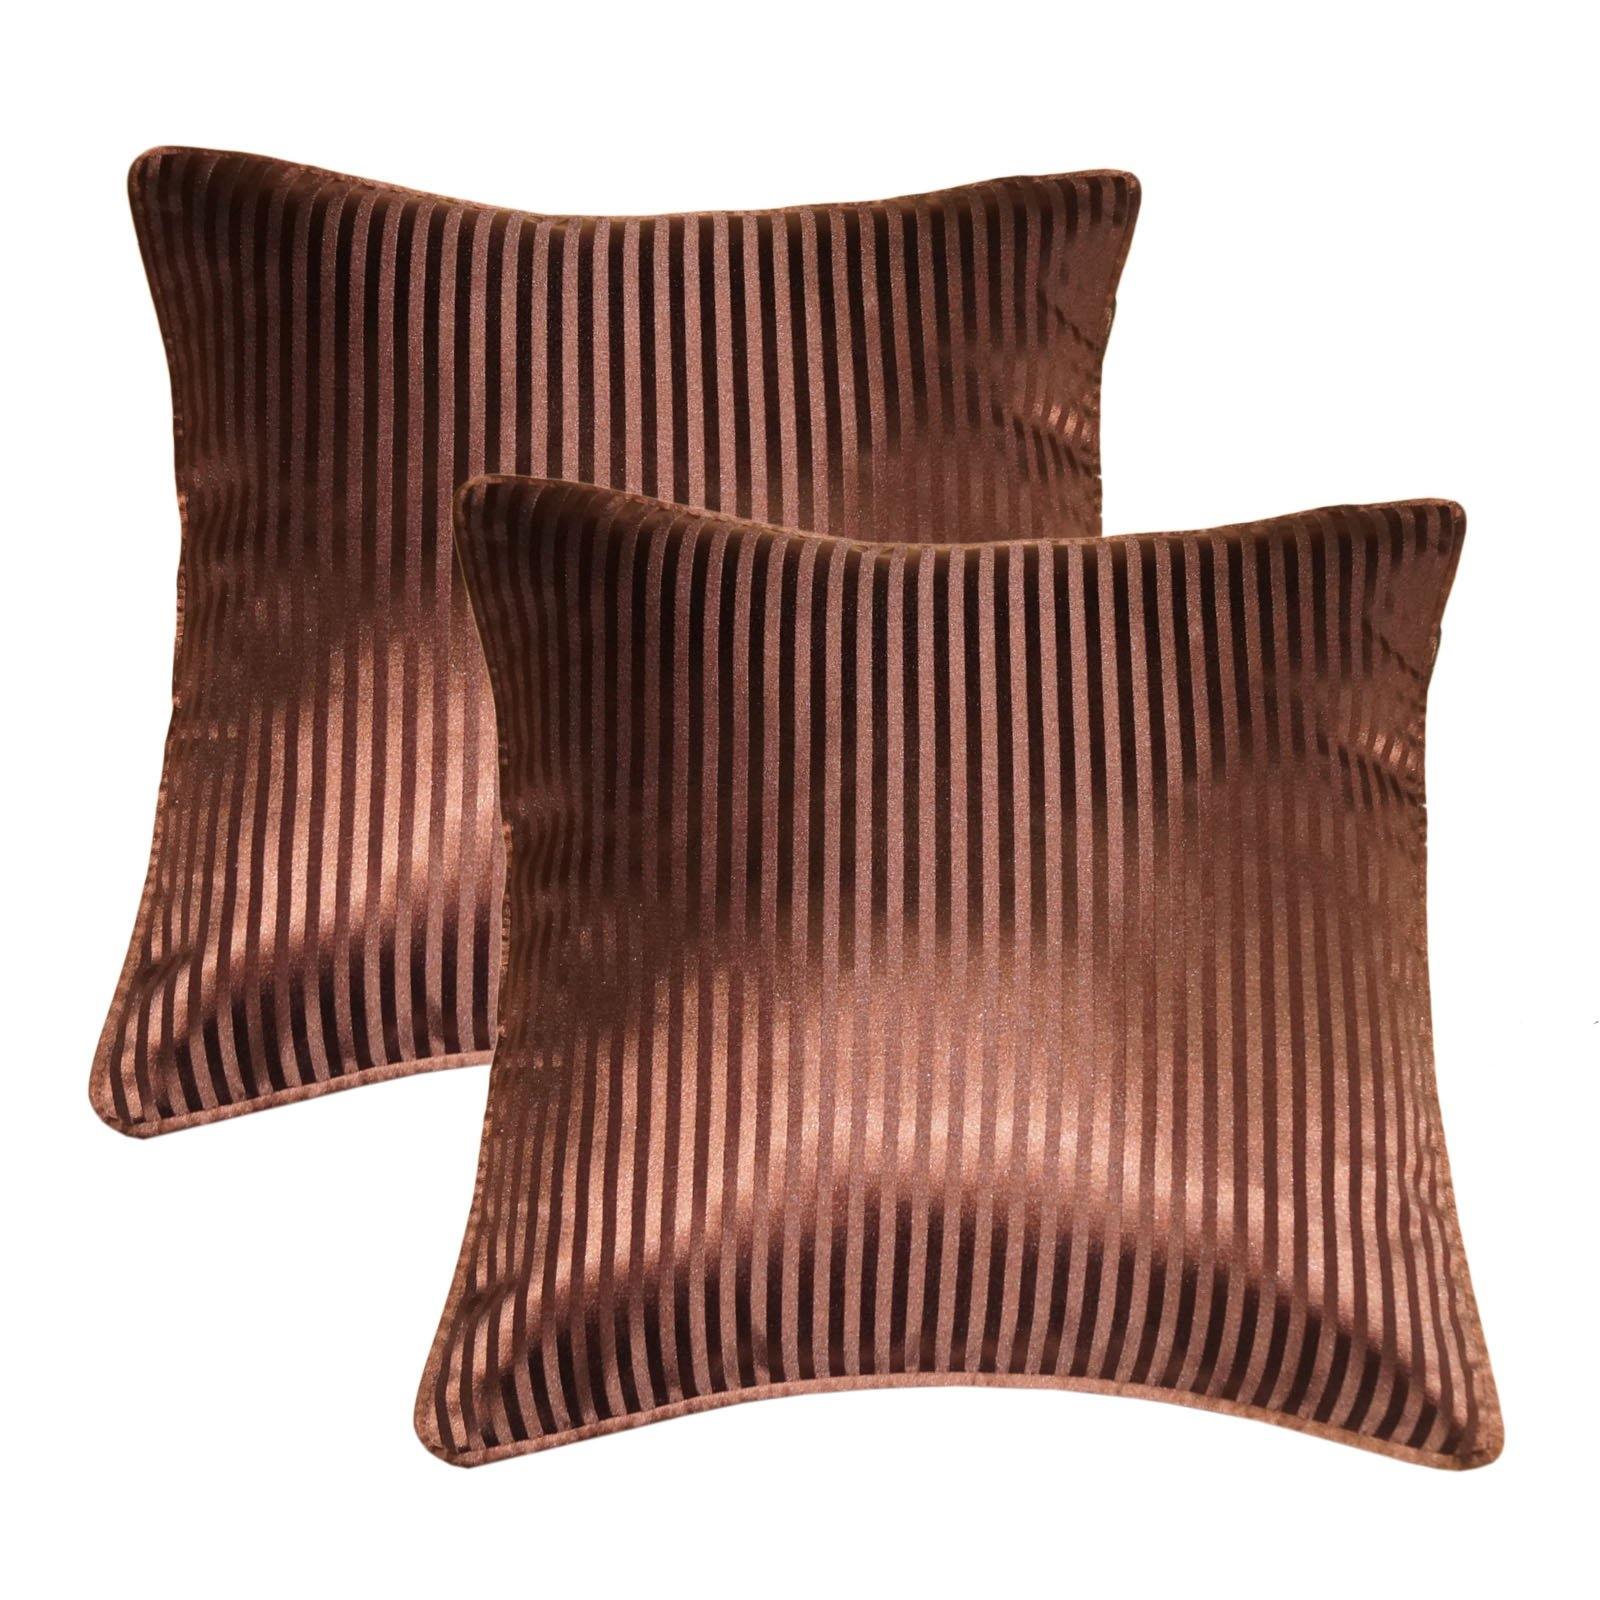 Lushomes chocolate contemporary stripped cushion cover with plain piping, 12 x 12‰۝(Pack of 2) Torantina Collection - Lushomes